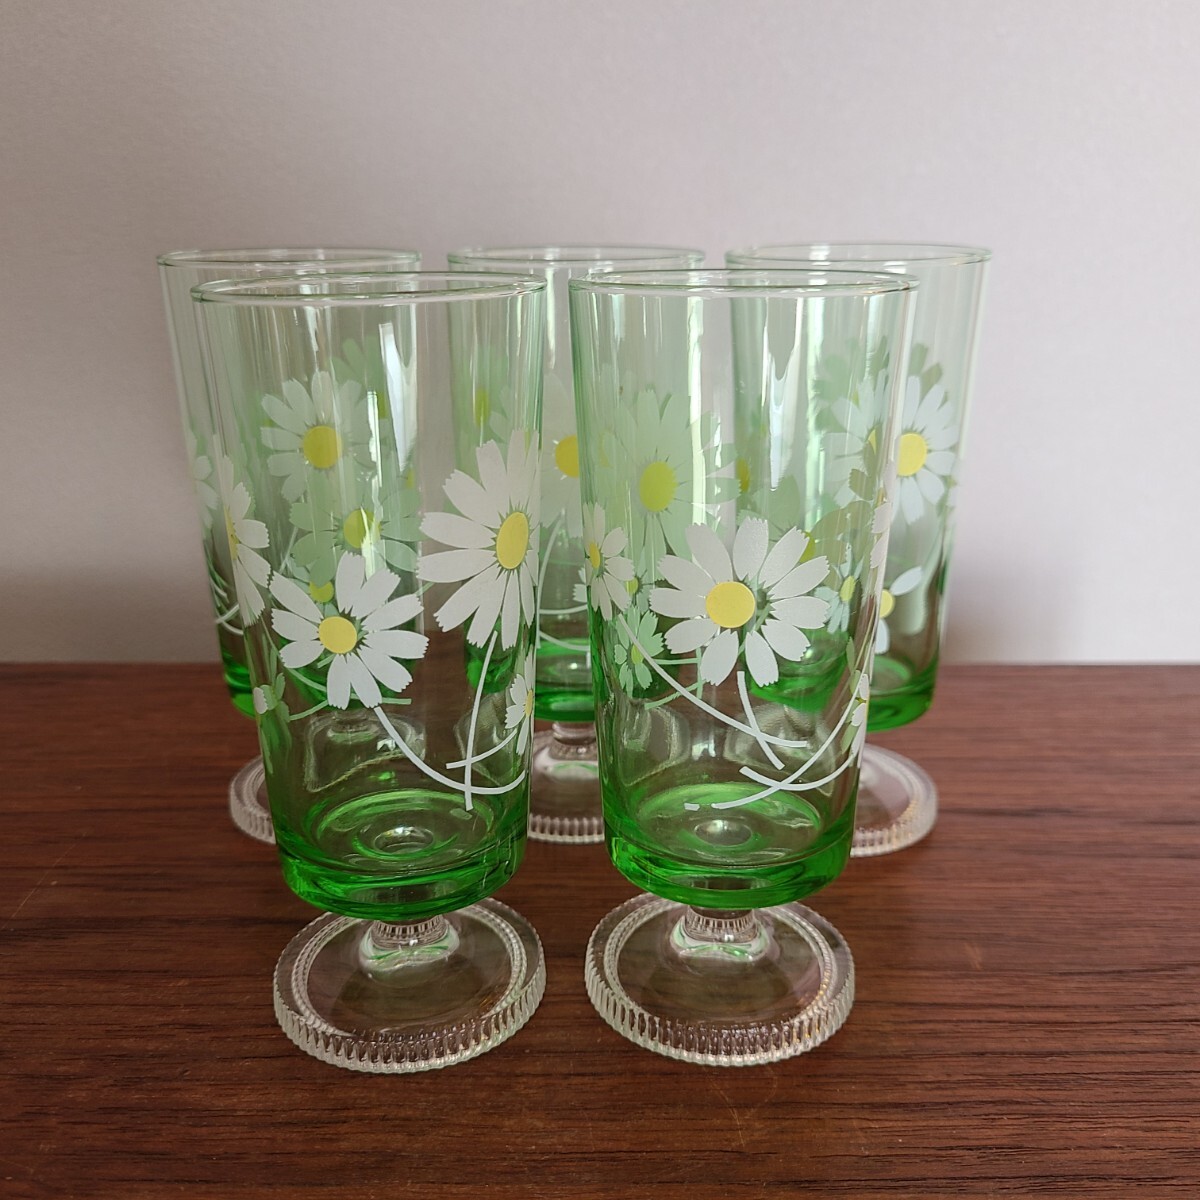 ate rear ADERIA Showa Retro Margaret legs attaching green glass 5 customer glass tumbler gala spade at that time thing height approximately 13.5cm